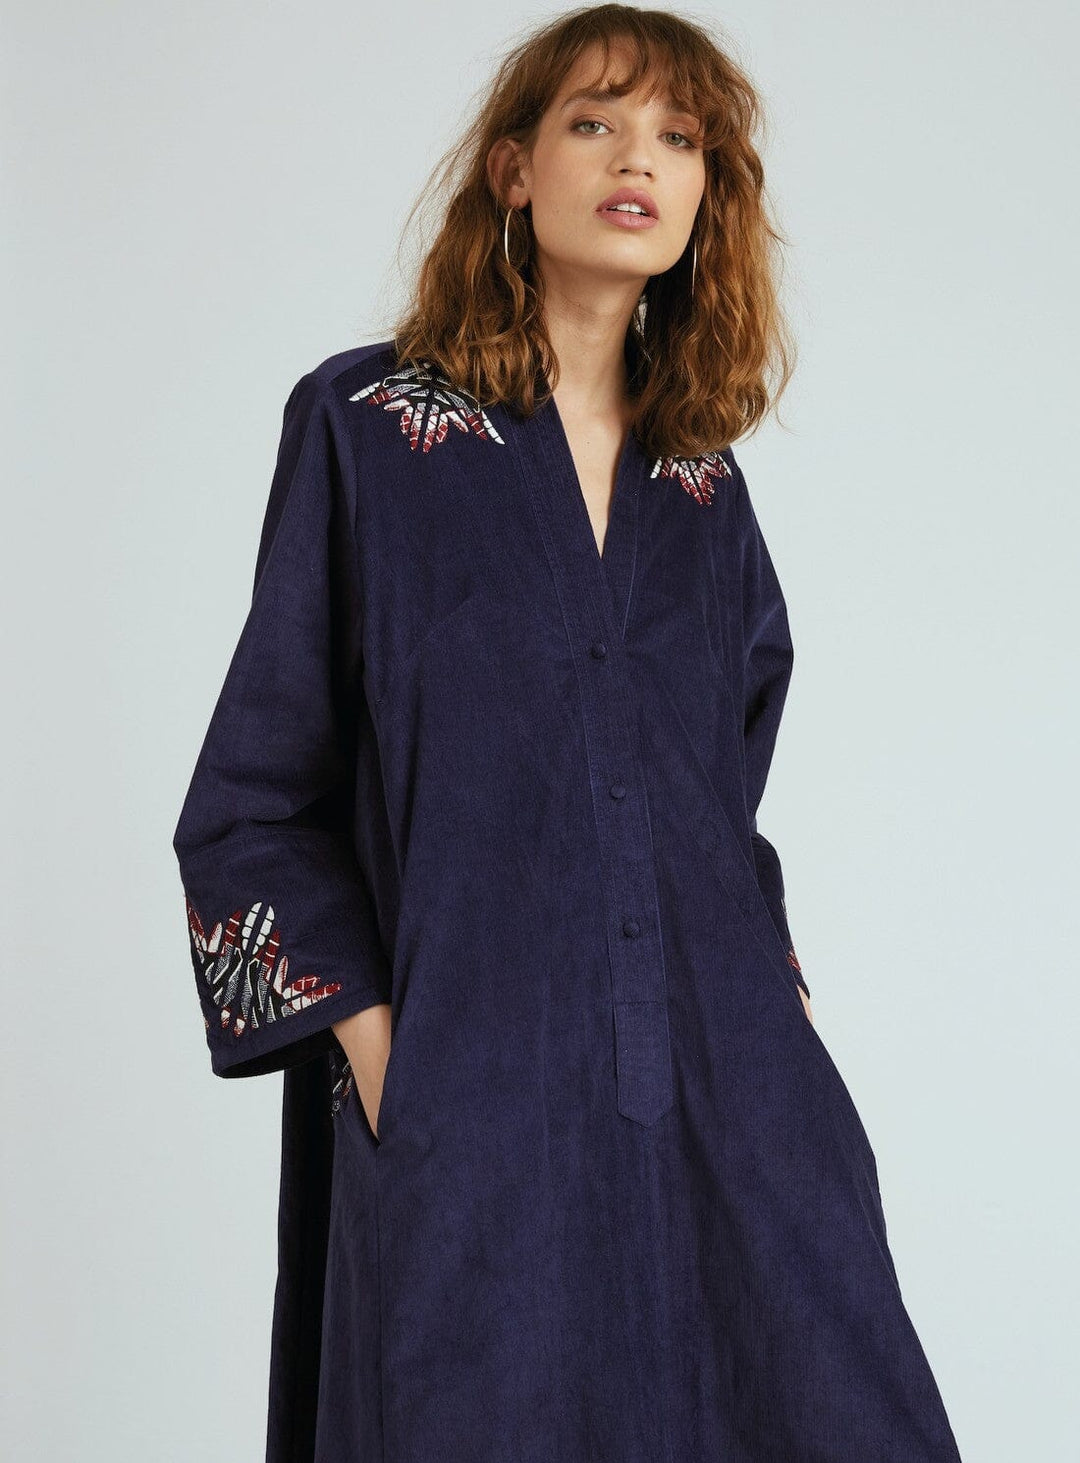 Port Eliot Dress in Navy Embroidered Dresses YBDFinds 